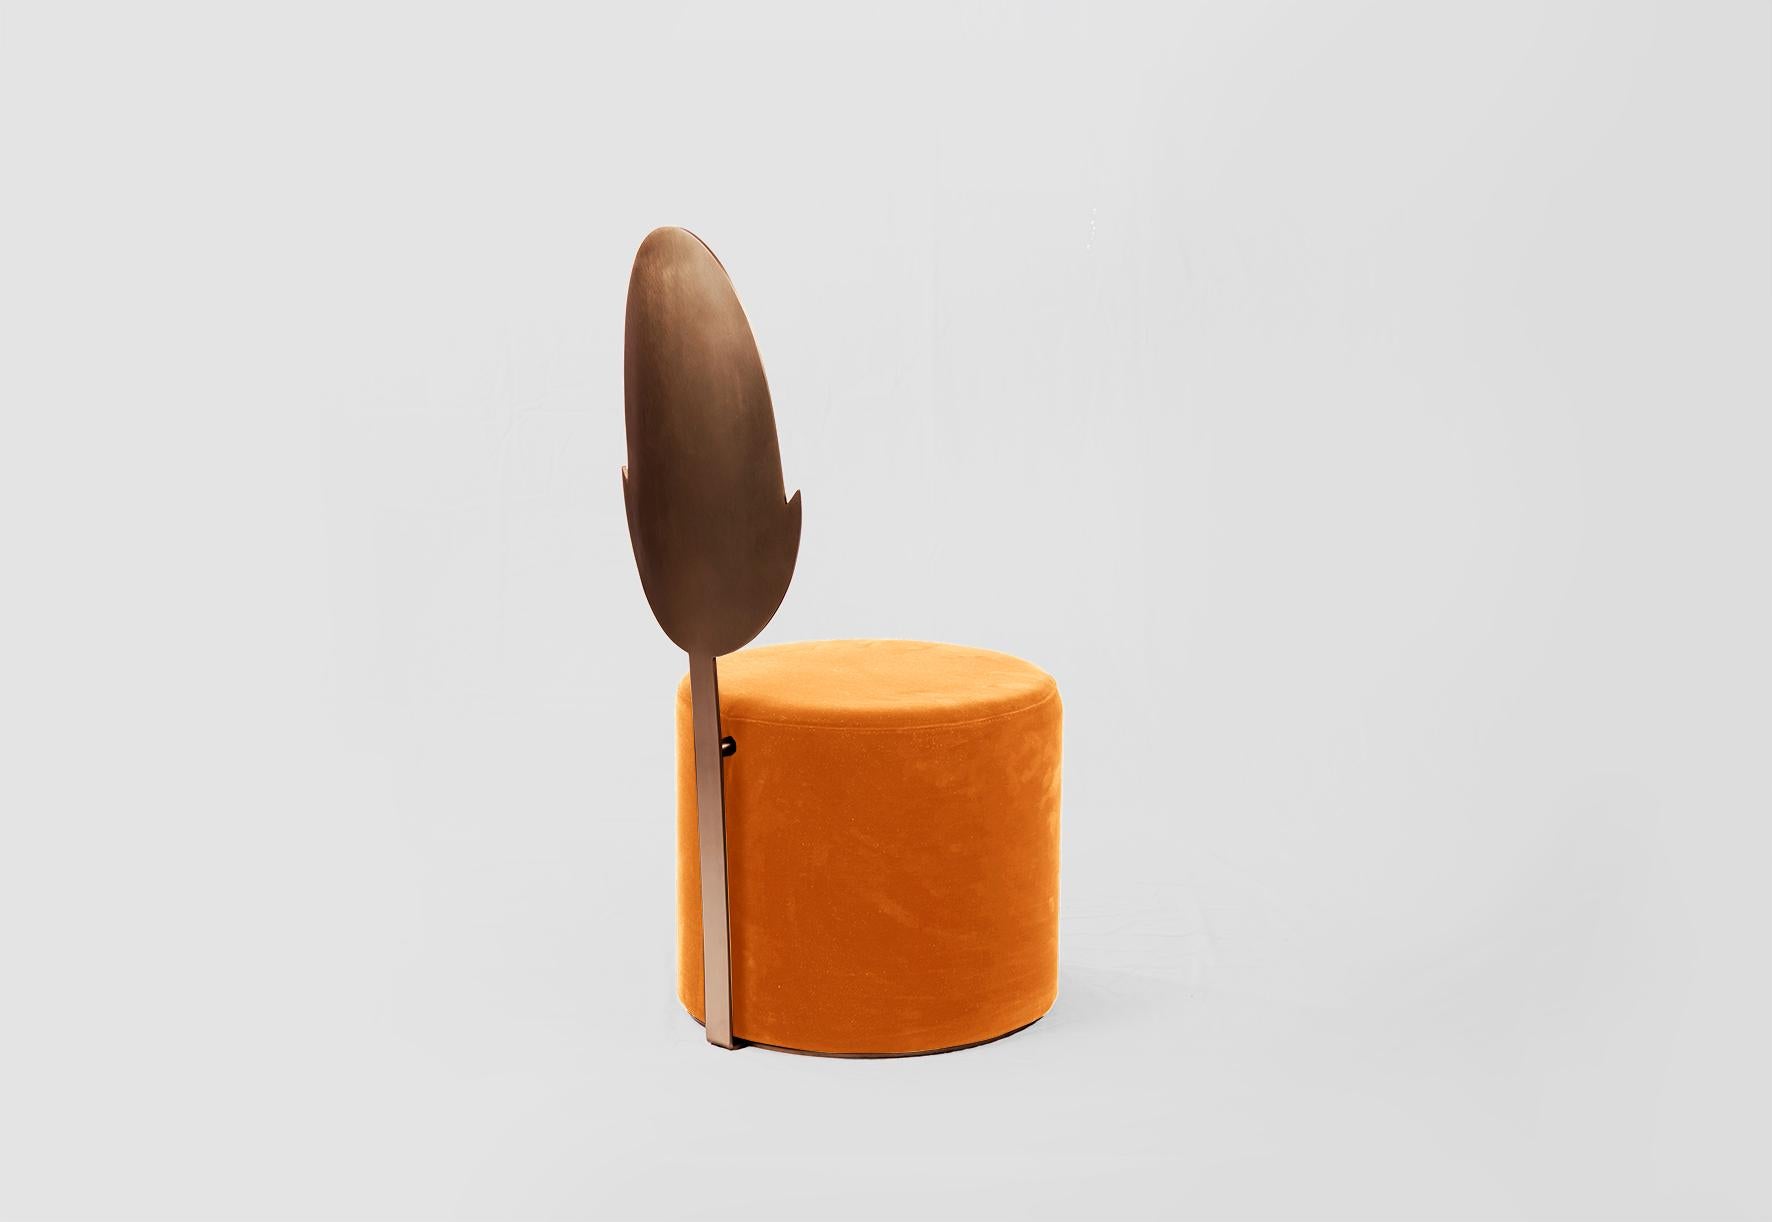 The 'Giardino Botanico' collection features five pouffes, each with a backrest inspired by a distinctive botanic shape. The backrest has some flexibility for added comfort and is gently curved to cradle the user. The ‘Giardino Botanico’ collection